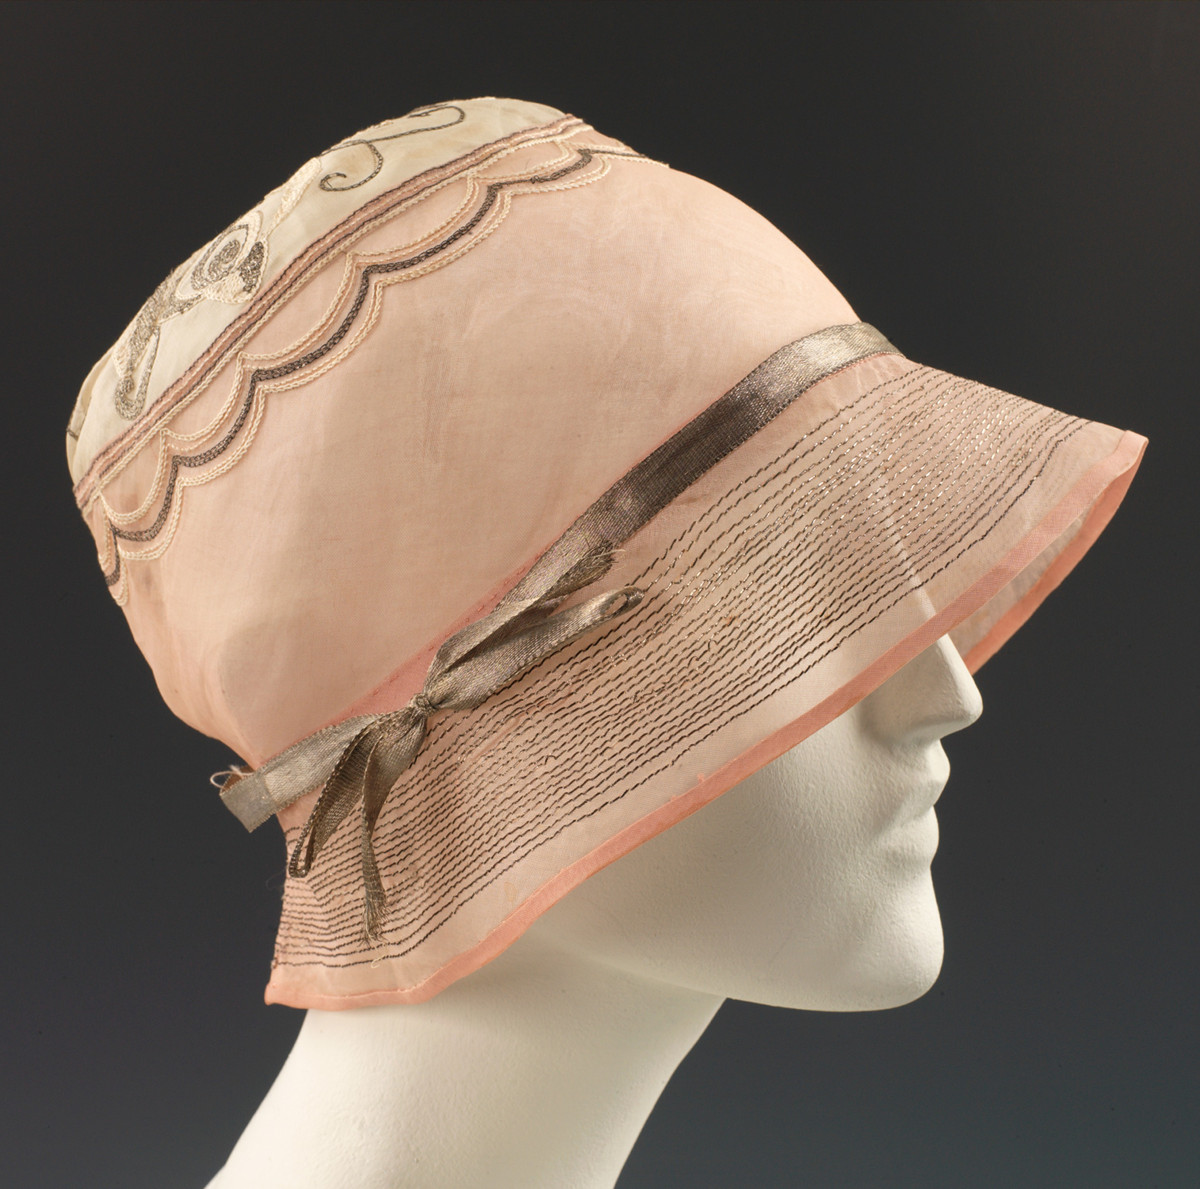 1925 Evening cloche. House of Lanvin. French. Cotton, metal